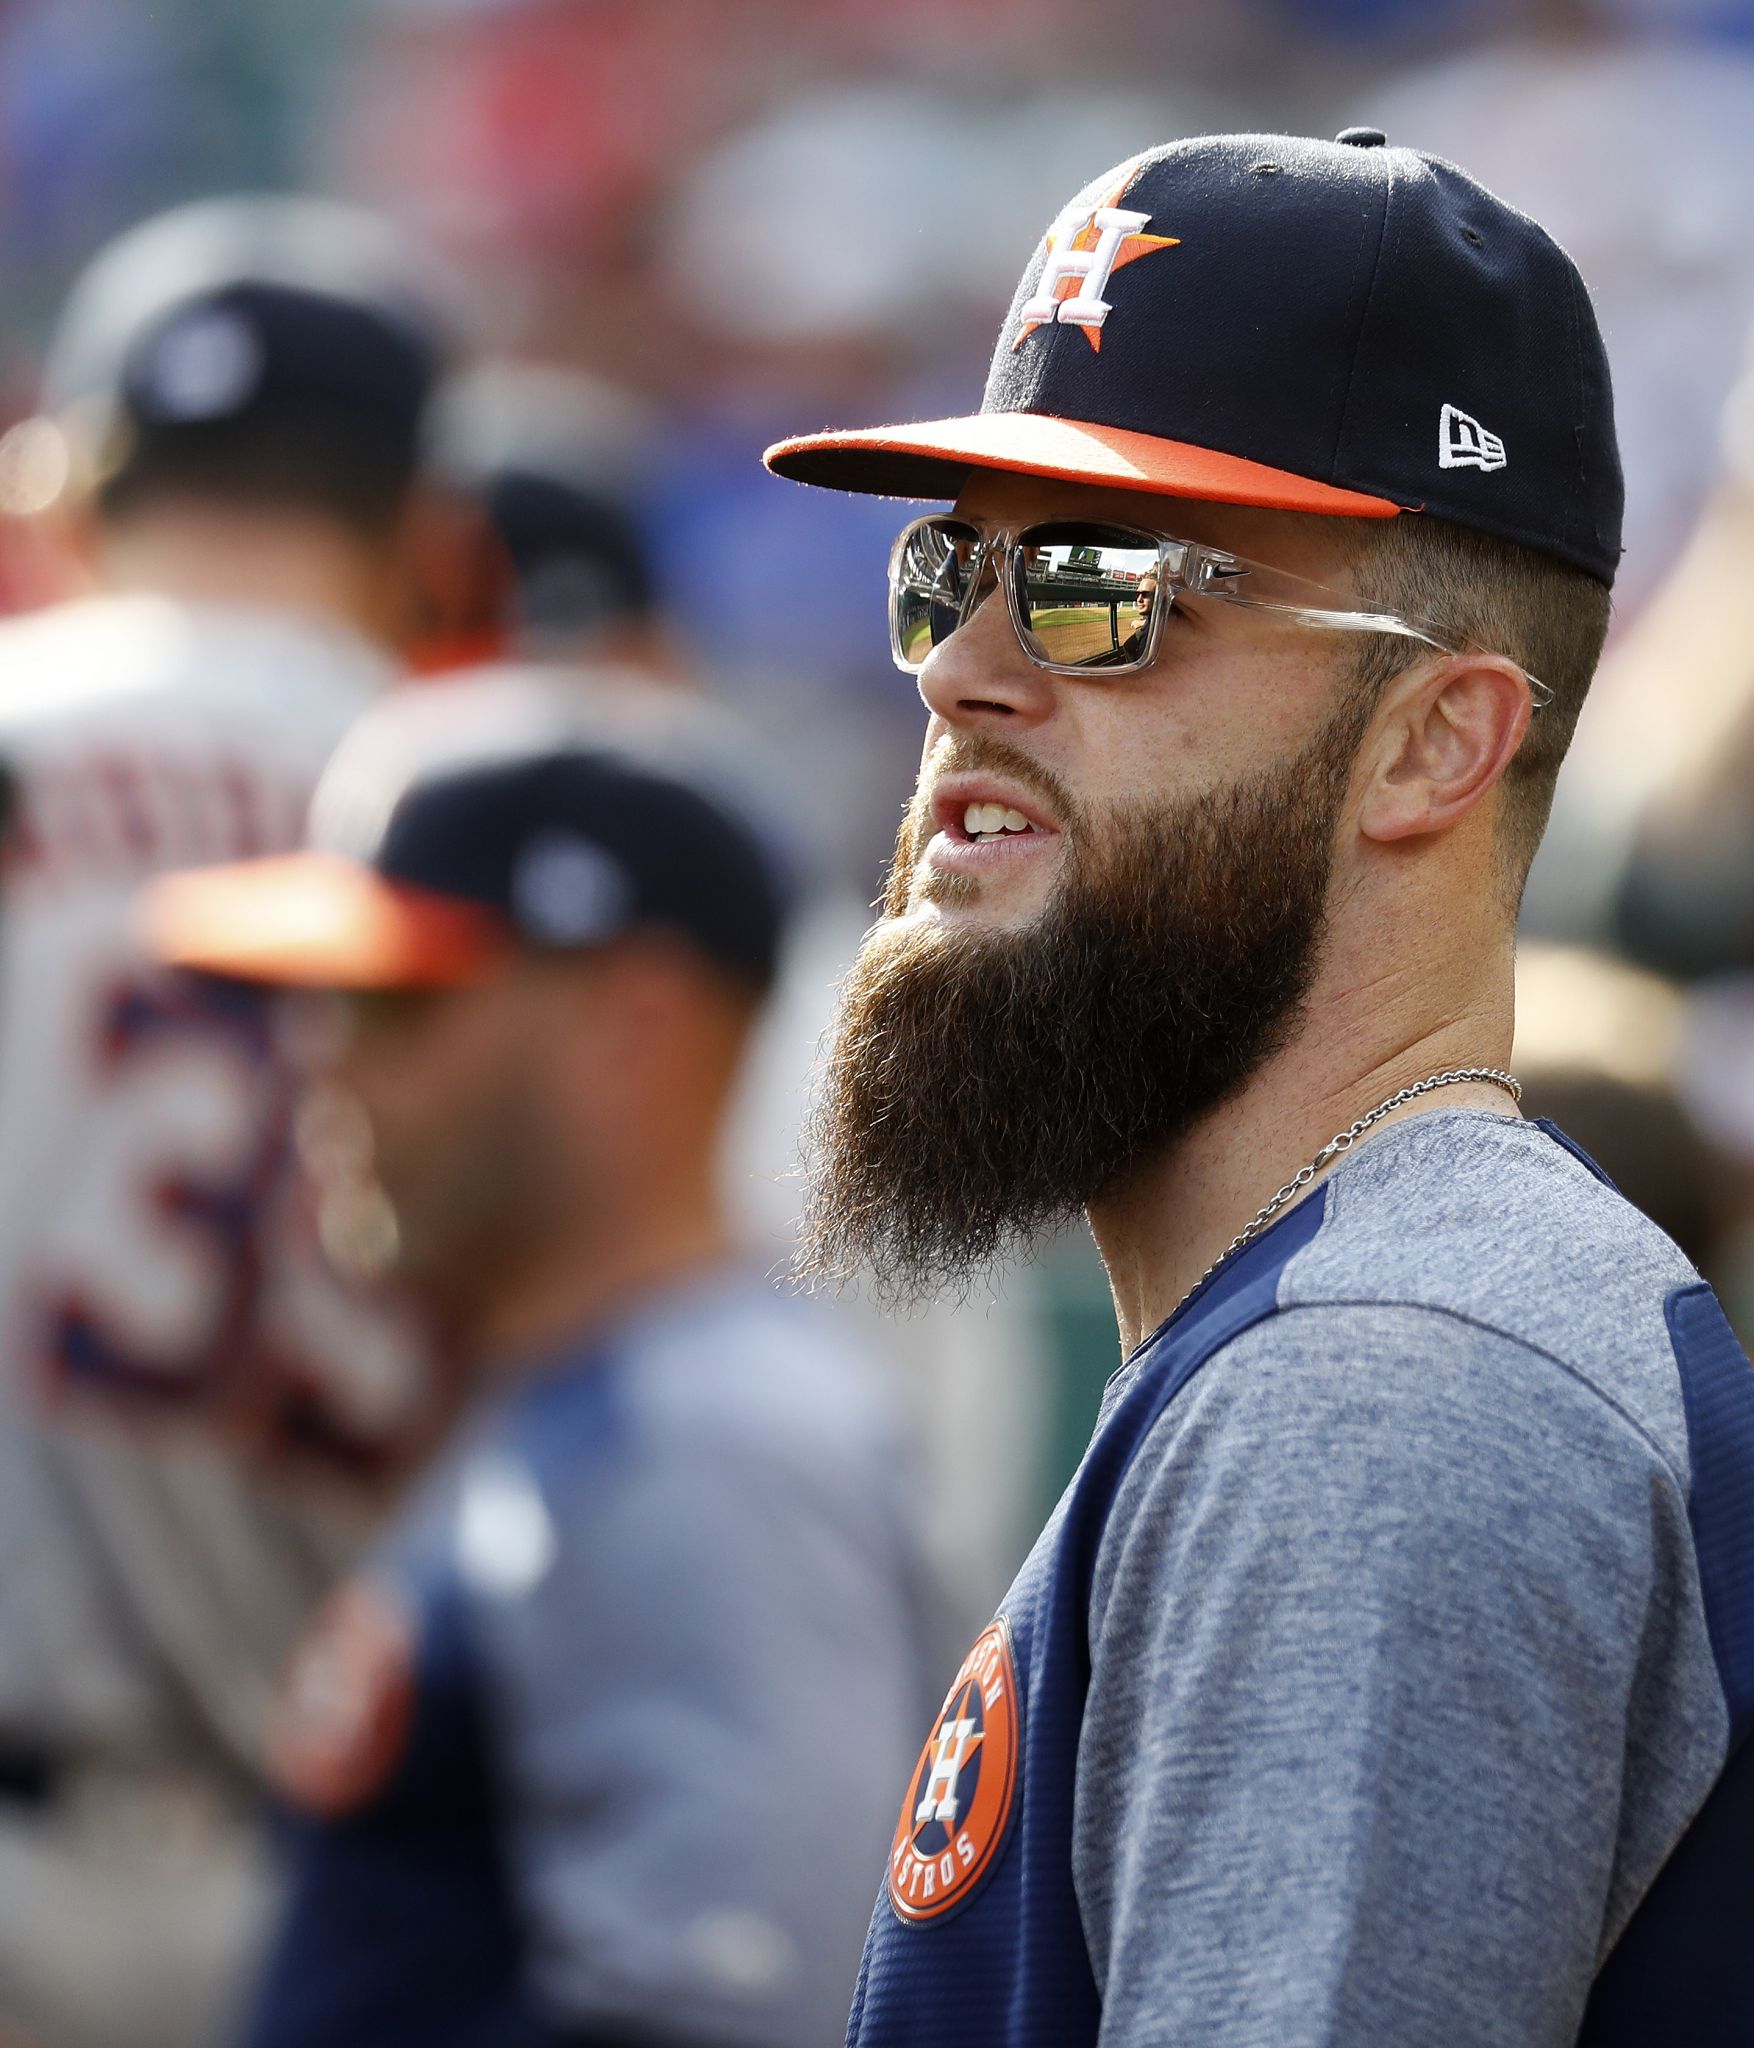 Check out Dallas Keuchel's cool new World Series tattoo